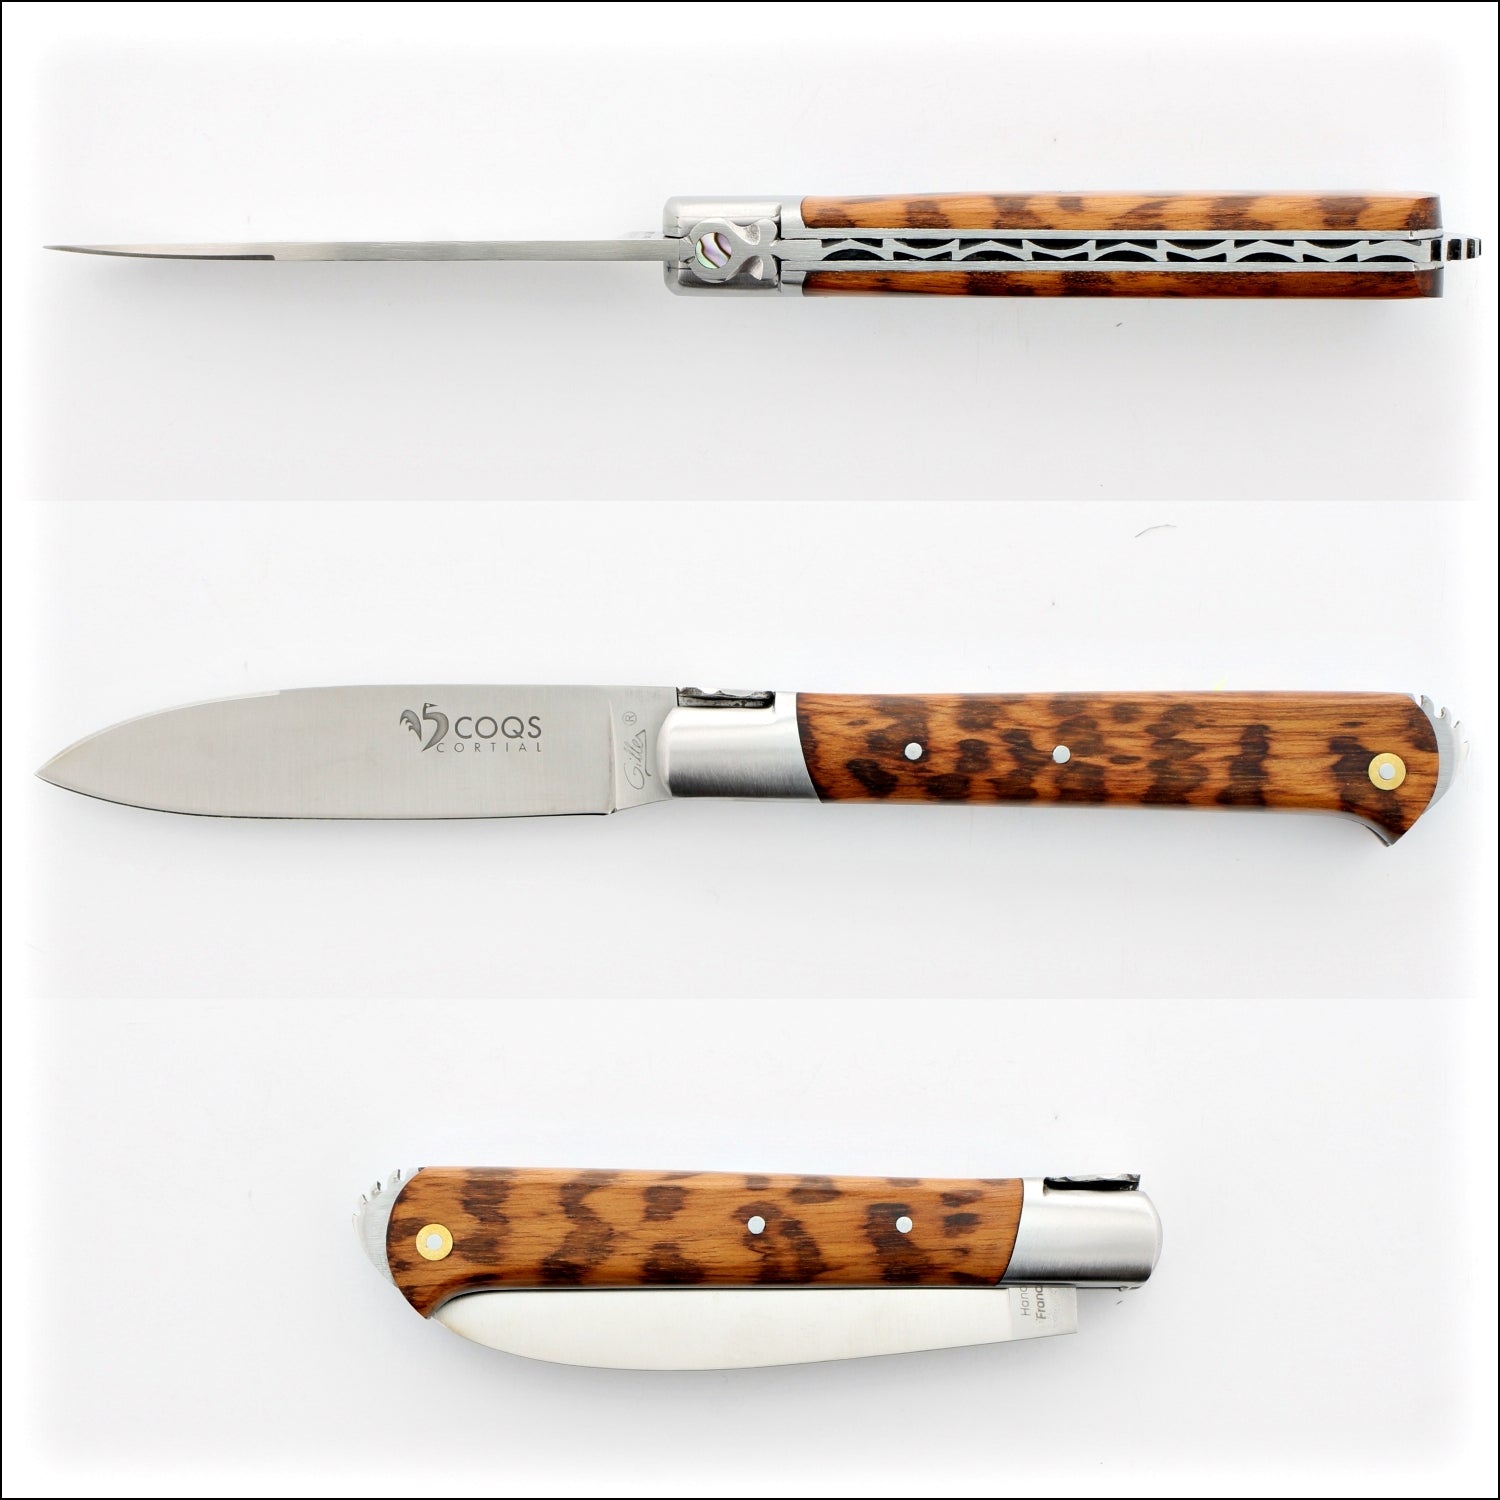 5 Coqs Pocket Knife - Amourette & Mother of Pearl Inlay